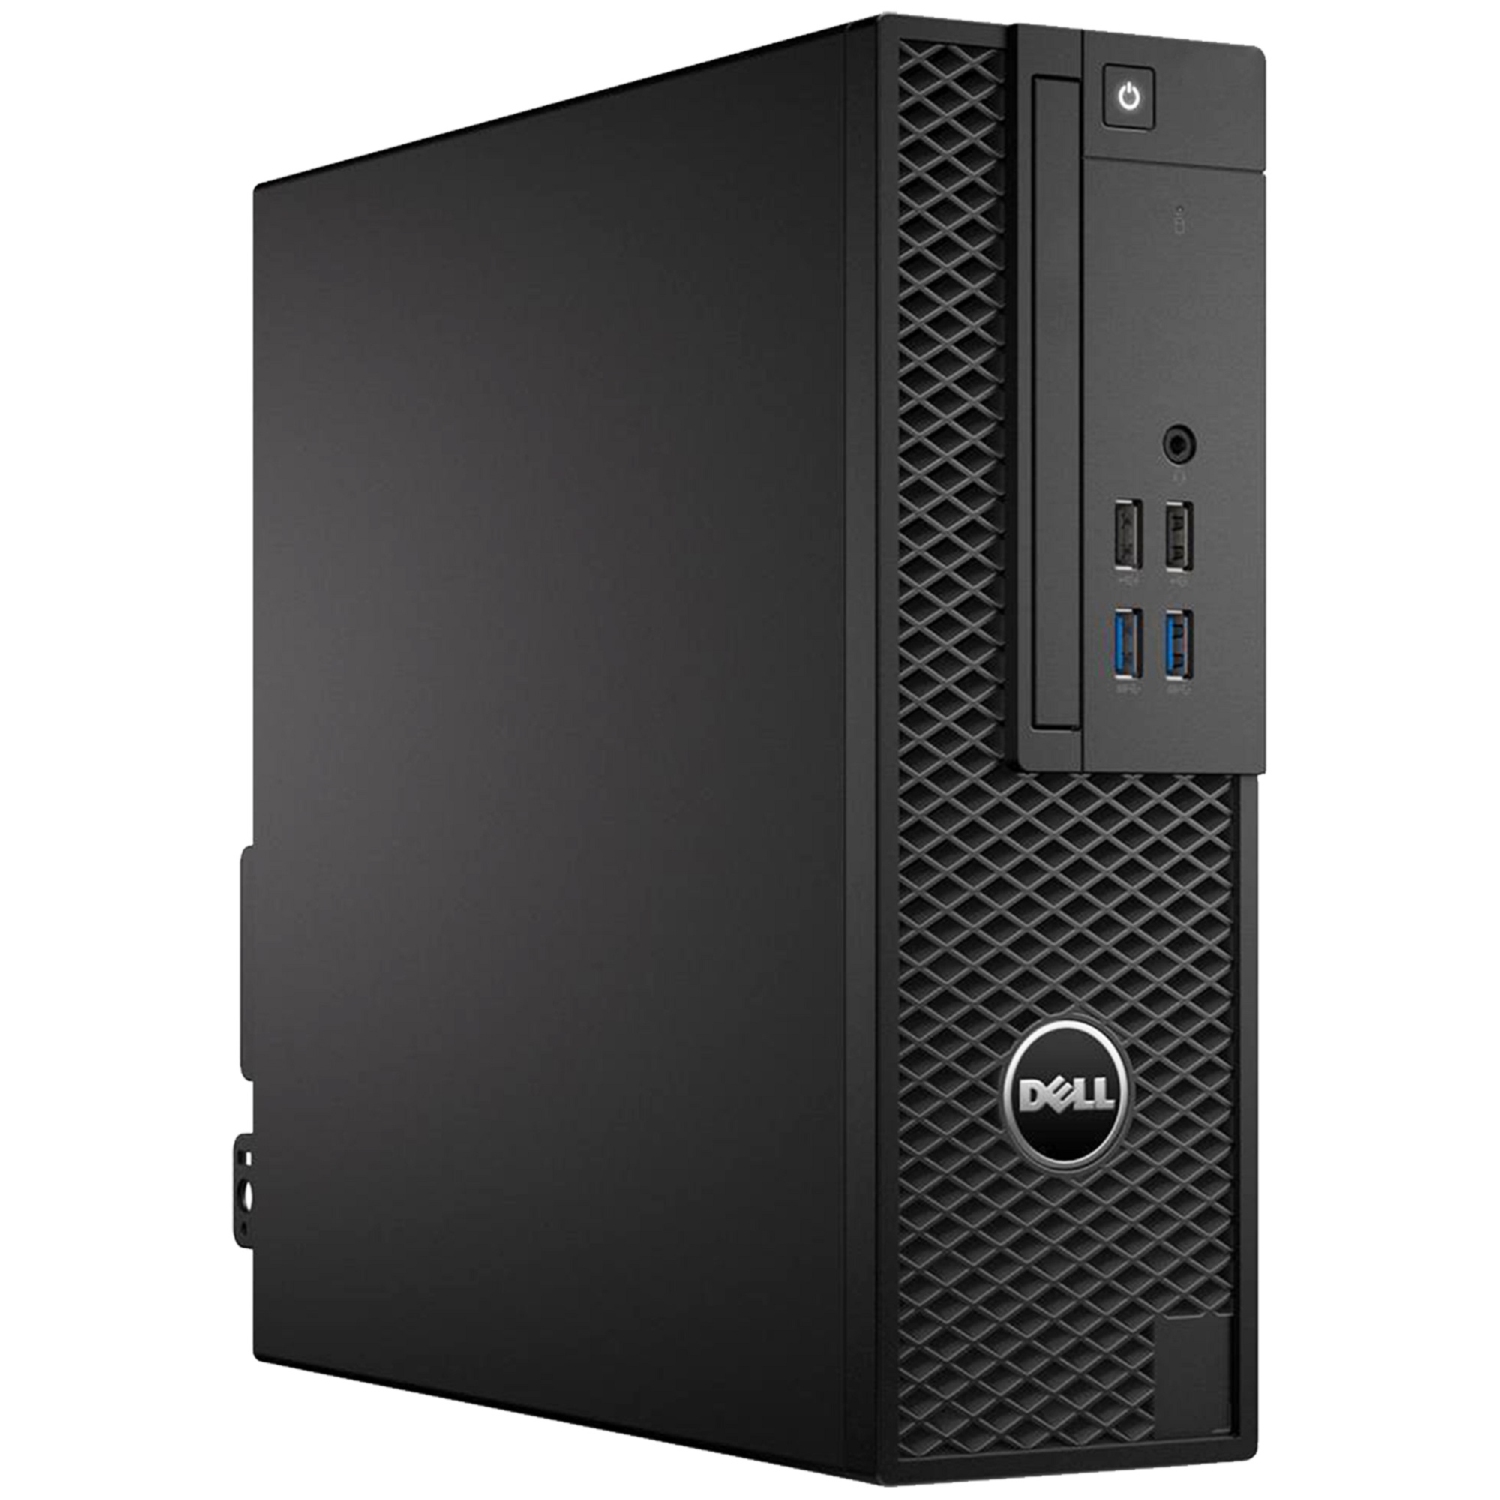 Refurbished (Good) - Dell Computers Precision 3420 SFF Home Office Desktop Computer PC, Intel Core i5 Processor, 16GB DDR4 RAM, 2TB SSD, Windows 10 Pro, Wireless Keyboard and Mouse